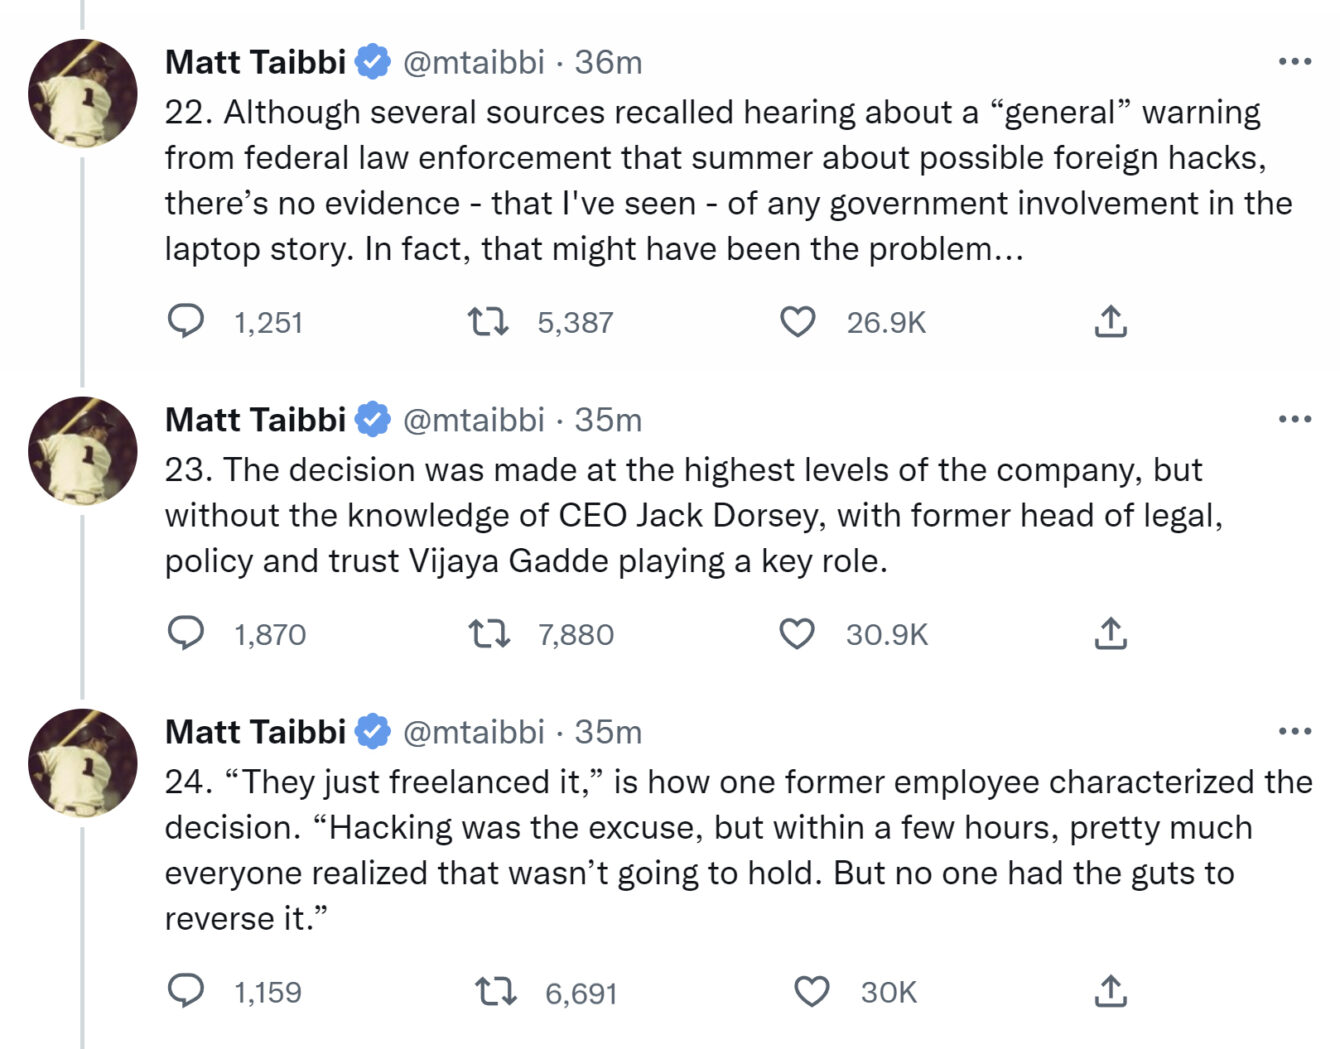 Matt Taibbi discusses Twitter's 2020 election interference on his Twitter account